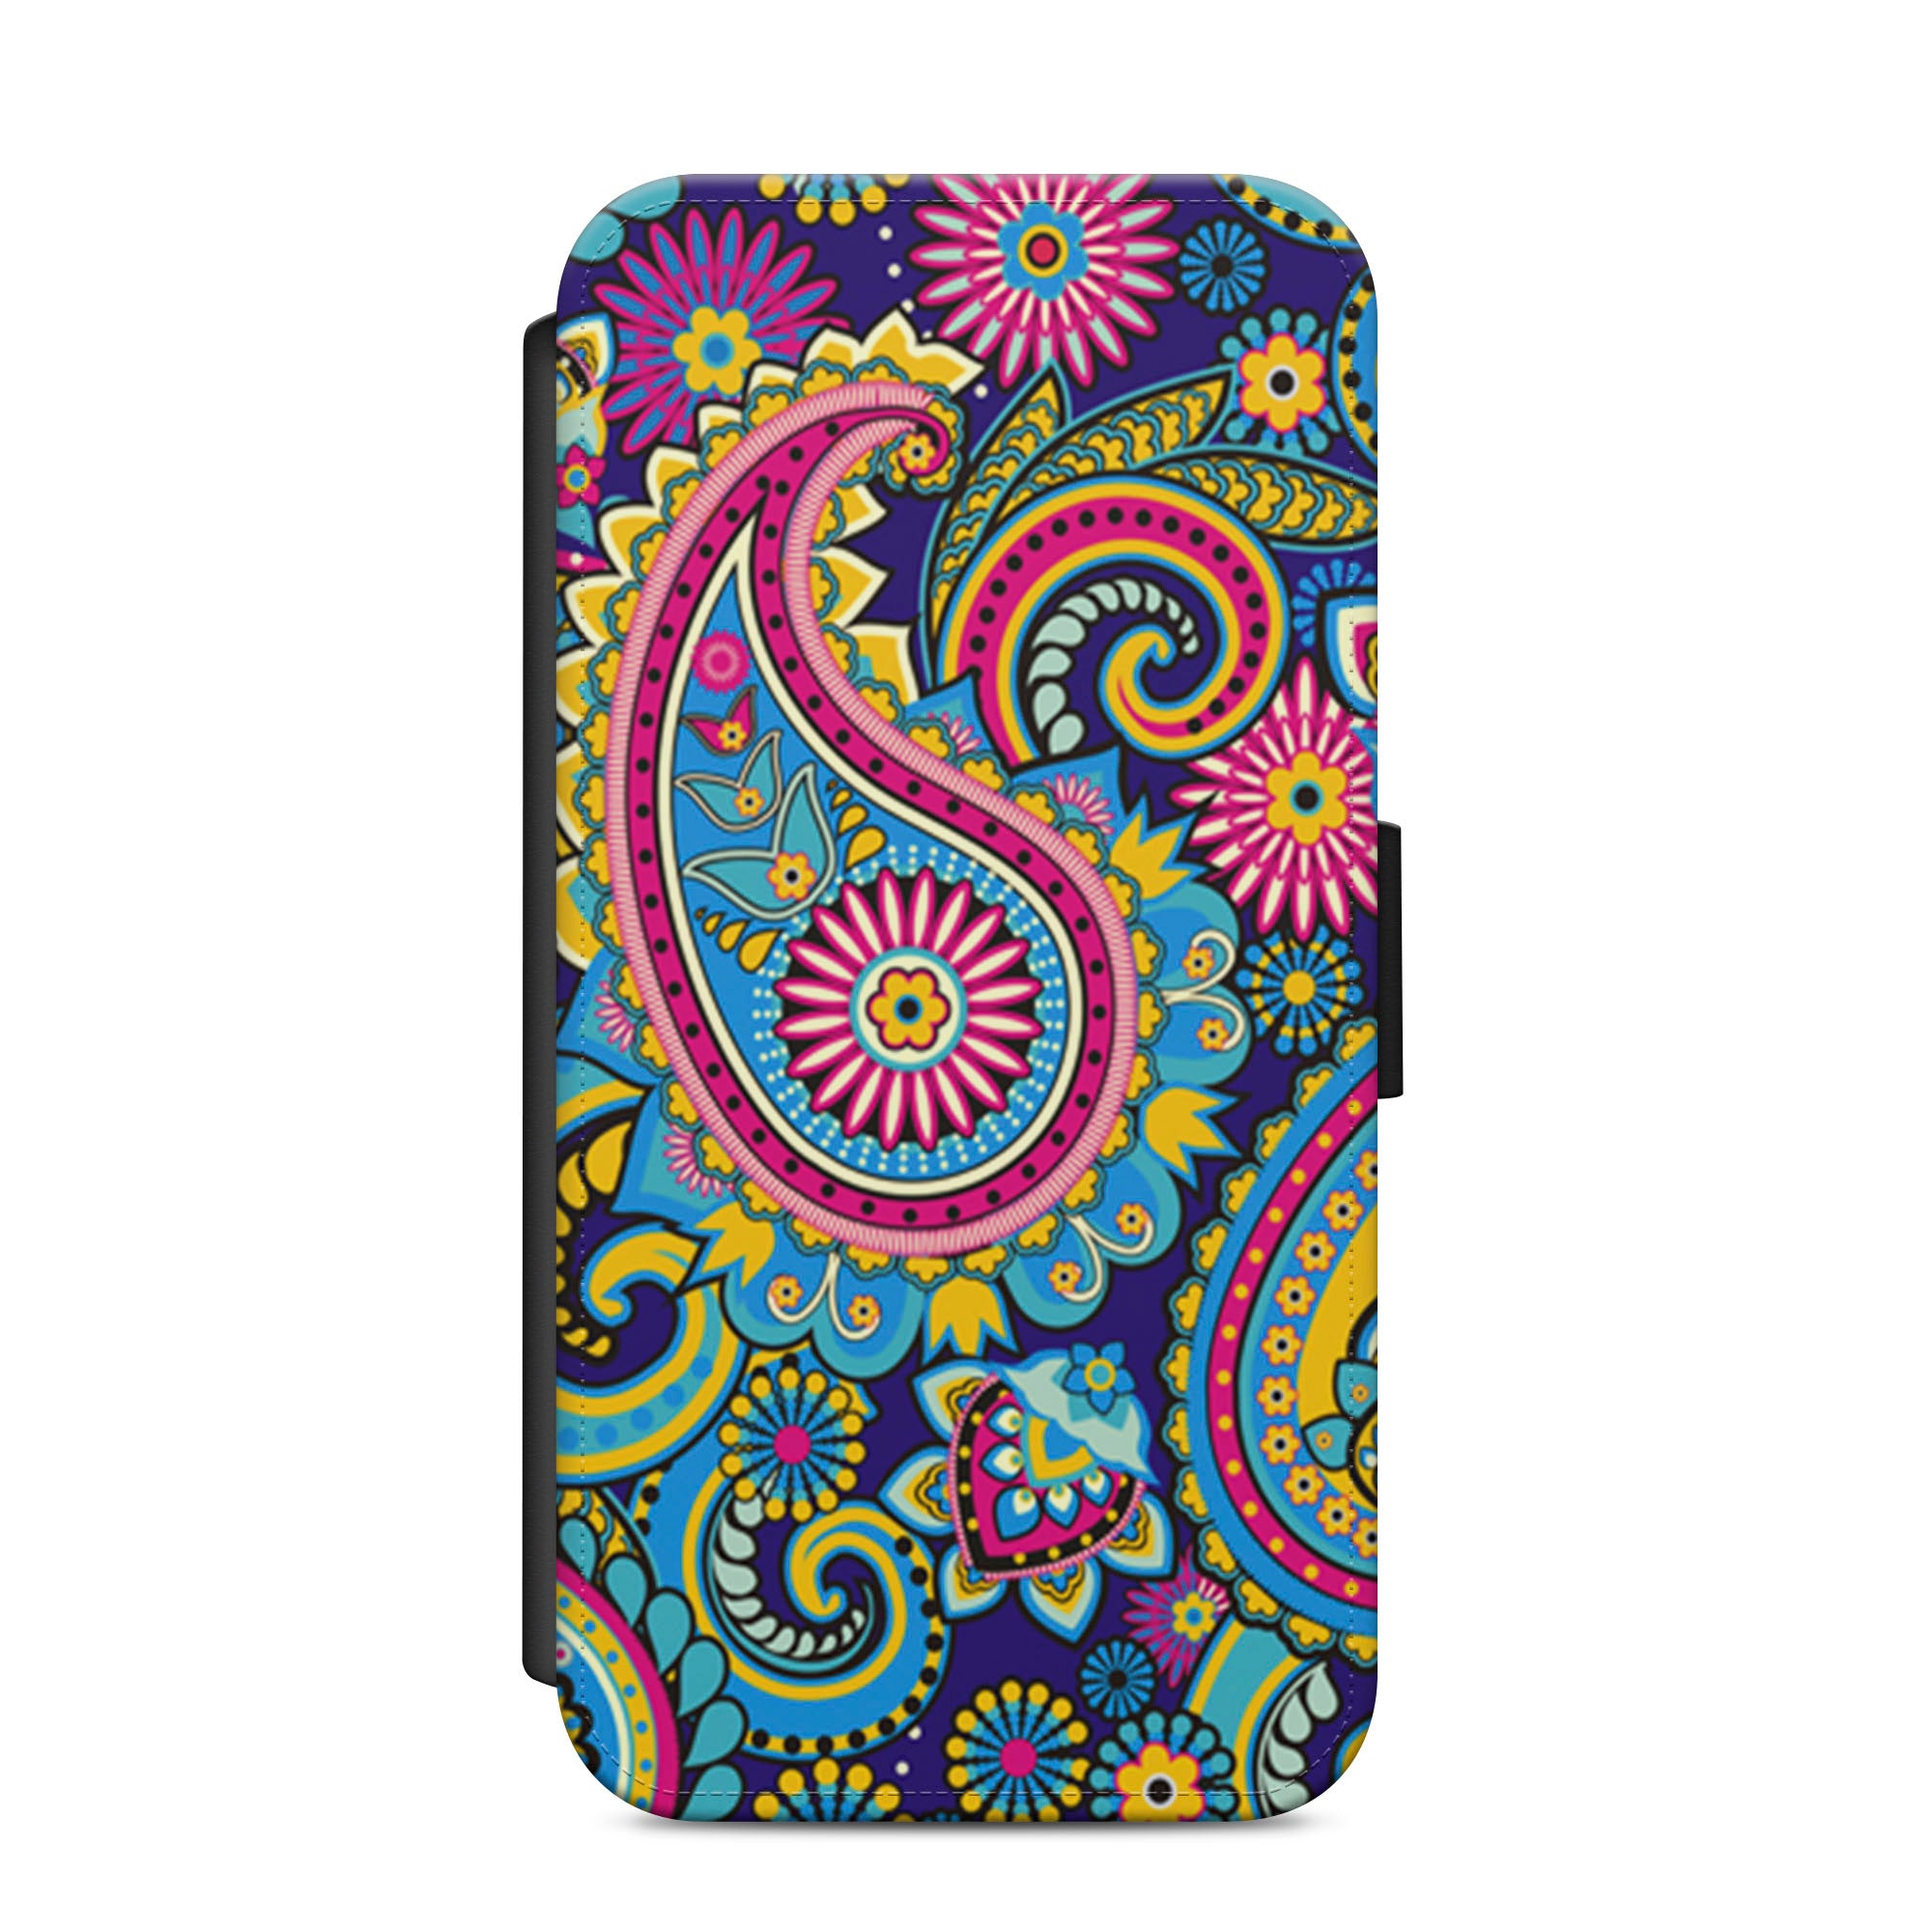 Paisley Pattern Faux Leather Flip Case Wallet for iPhone / Samsung